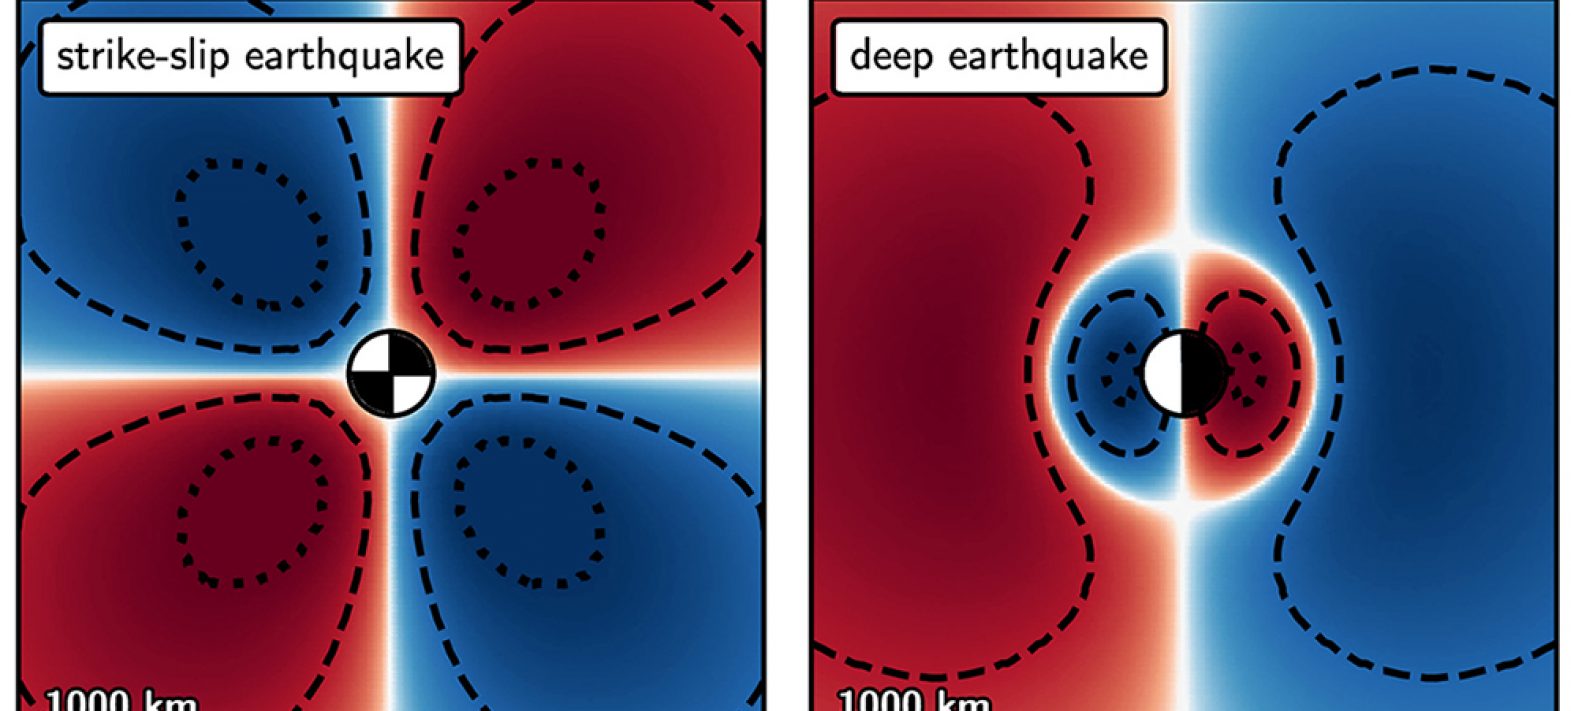 Observation of early signals of disruption of the Earth’s gravity field linked to multiple earthquakes